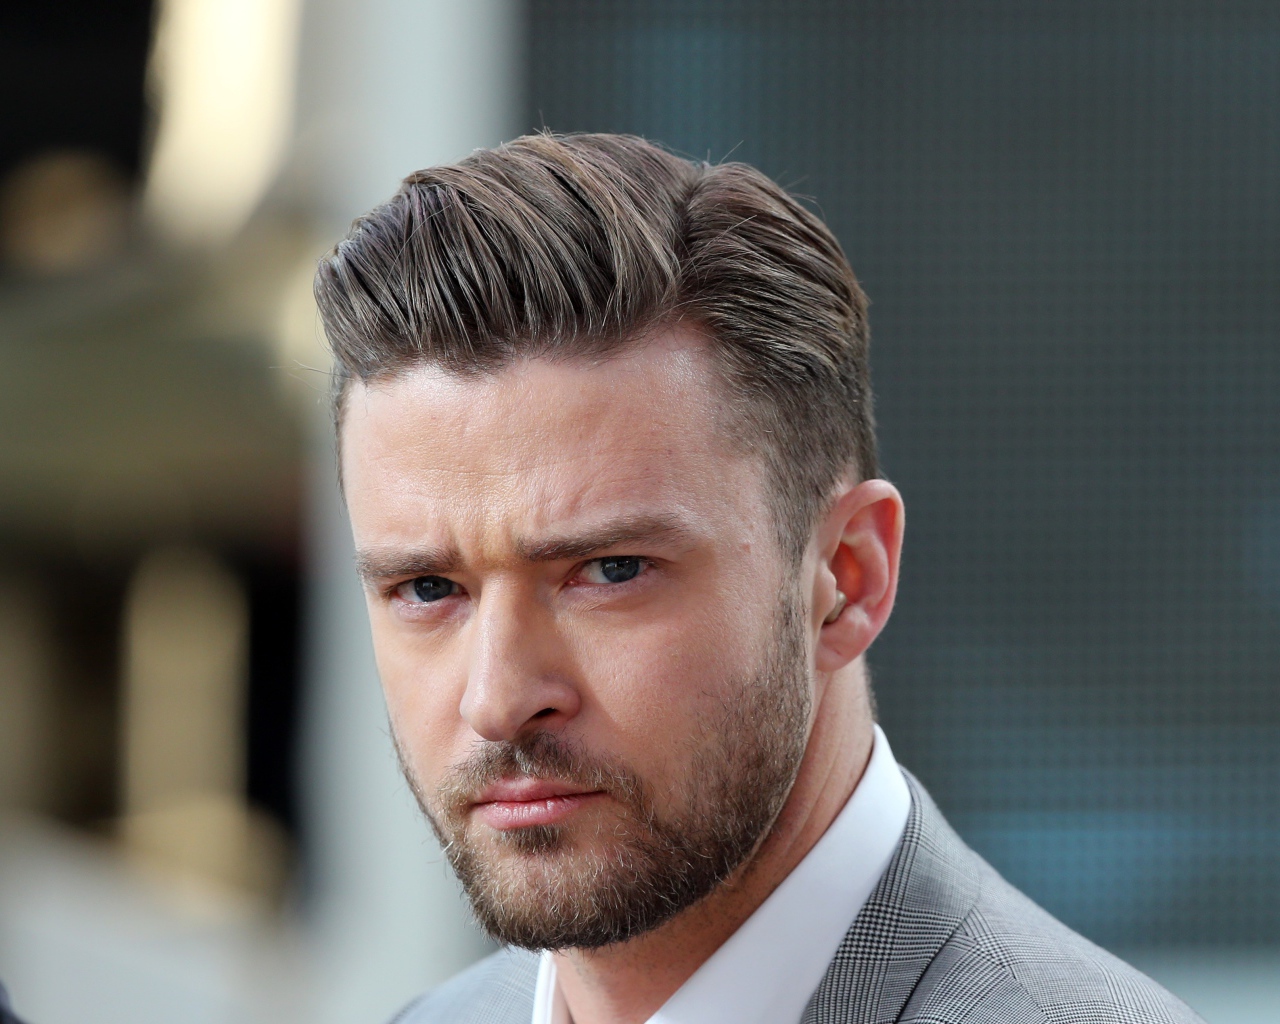 Actor Justin Timberlake with a serious look